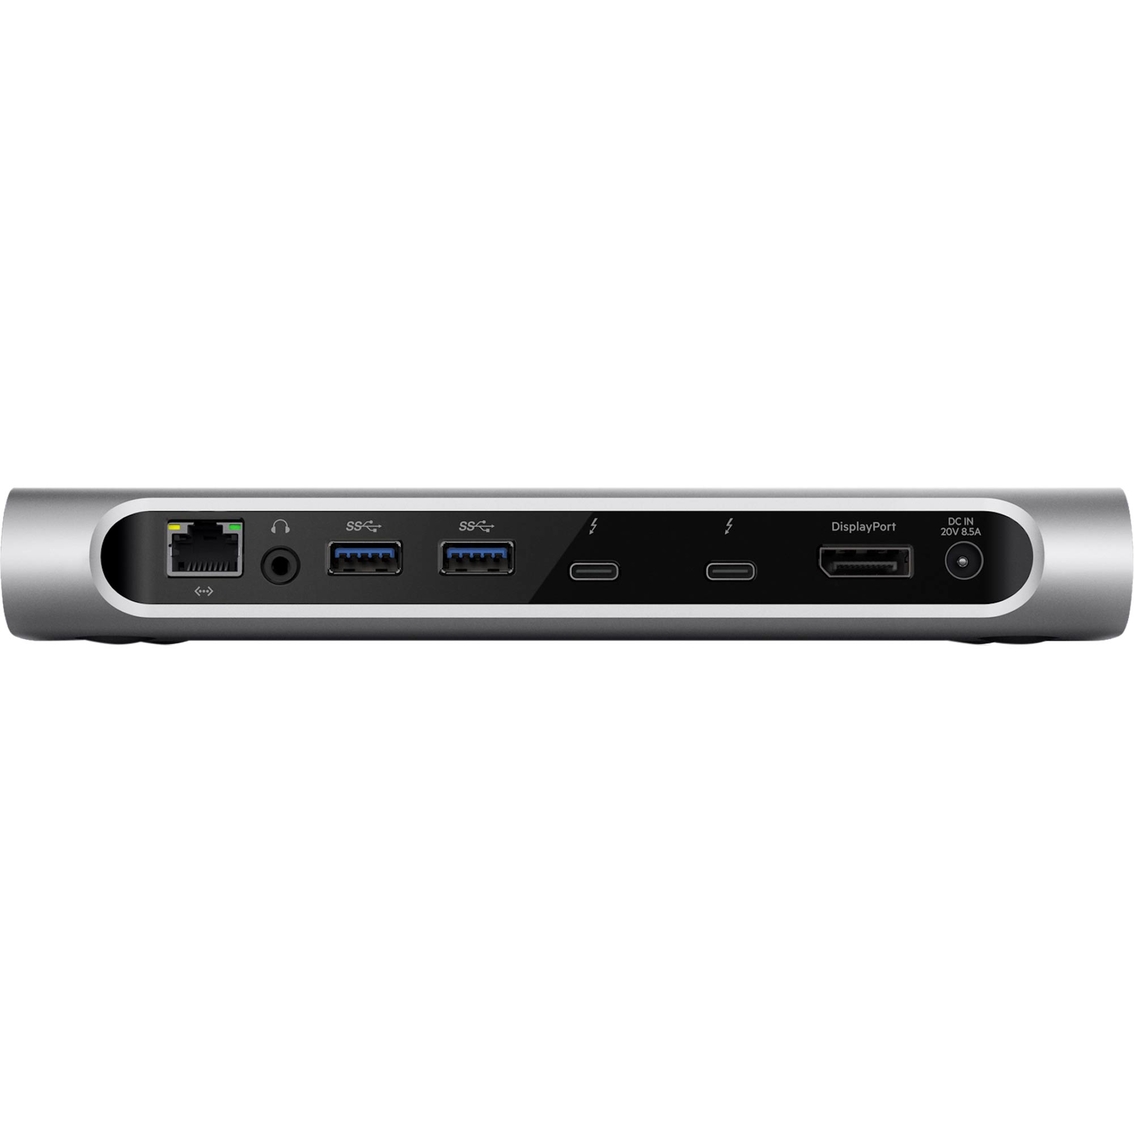 Belkin Thunderbolt 3 Express Dock Hd With 1 Meter Cable | Adapters